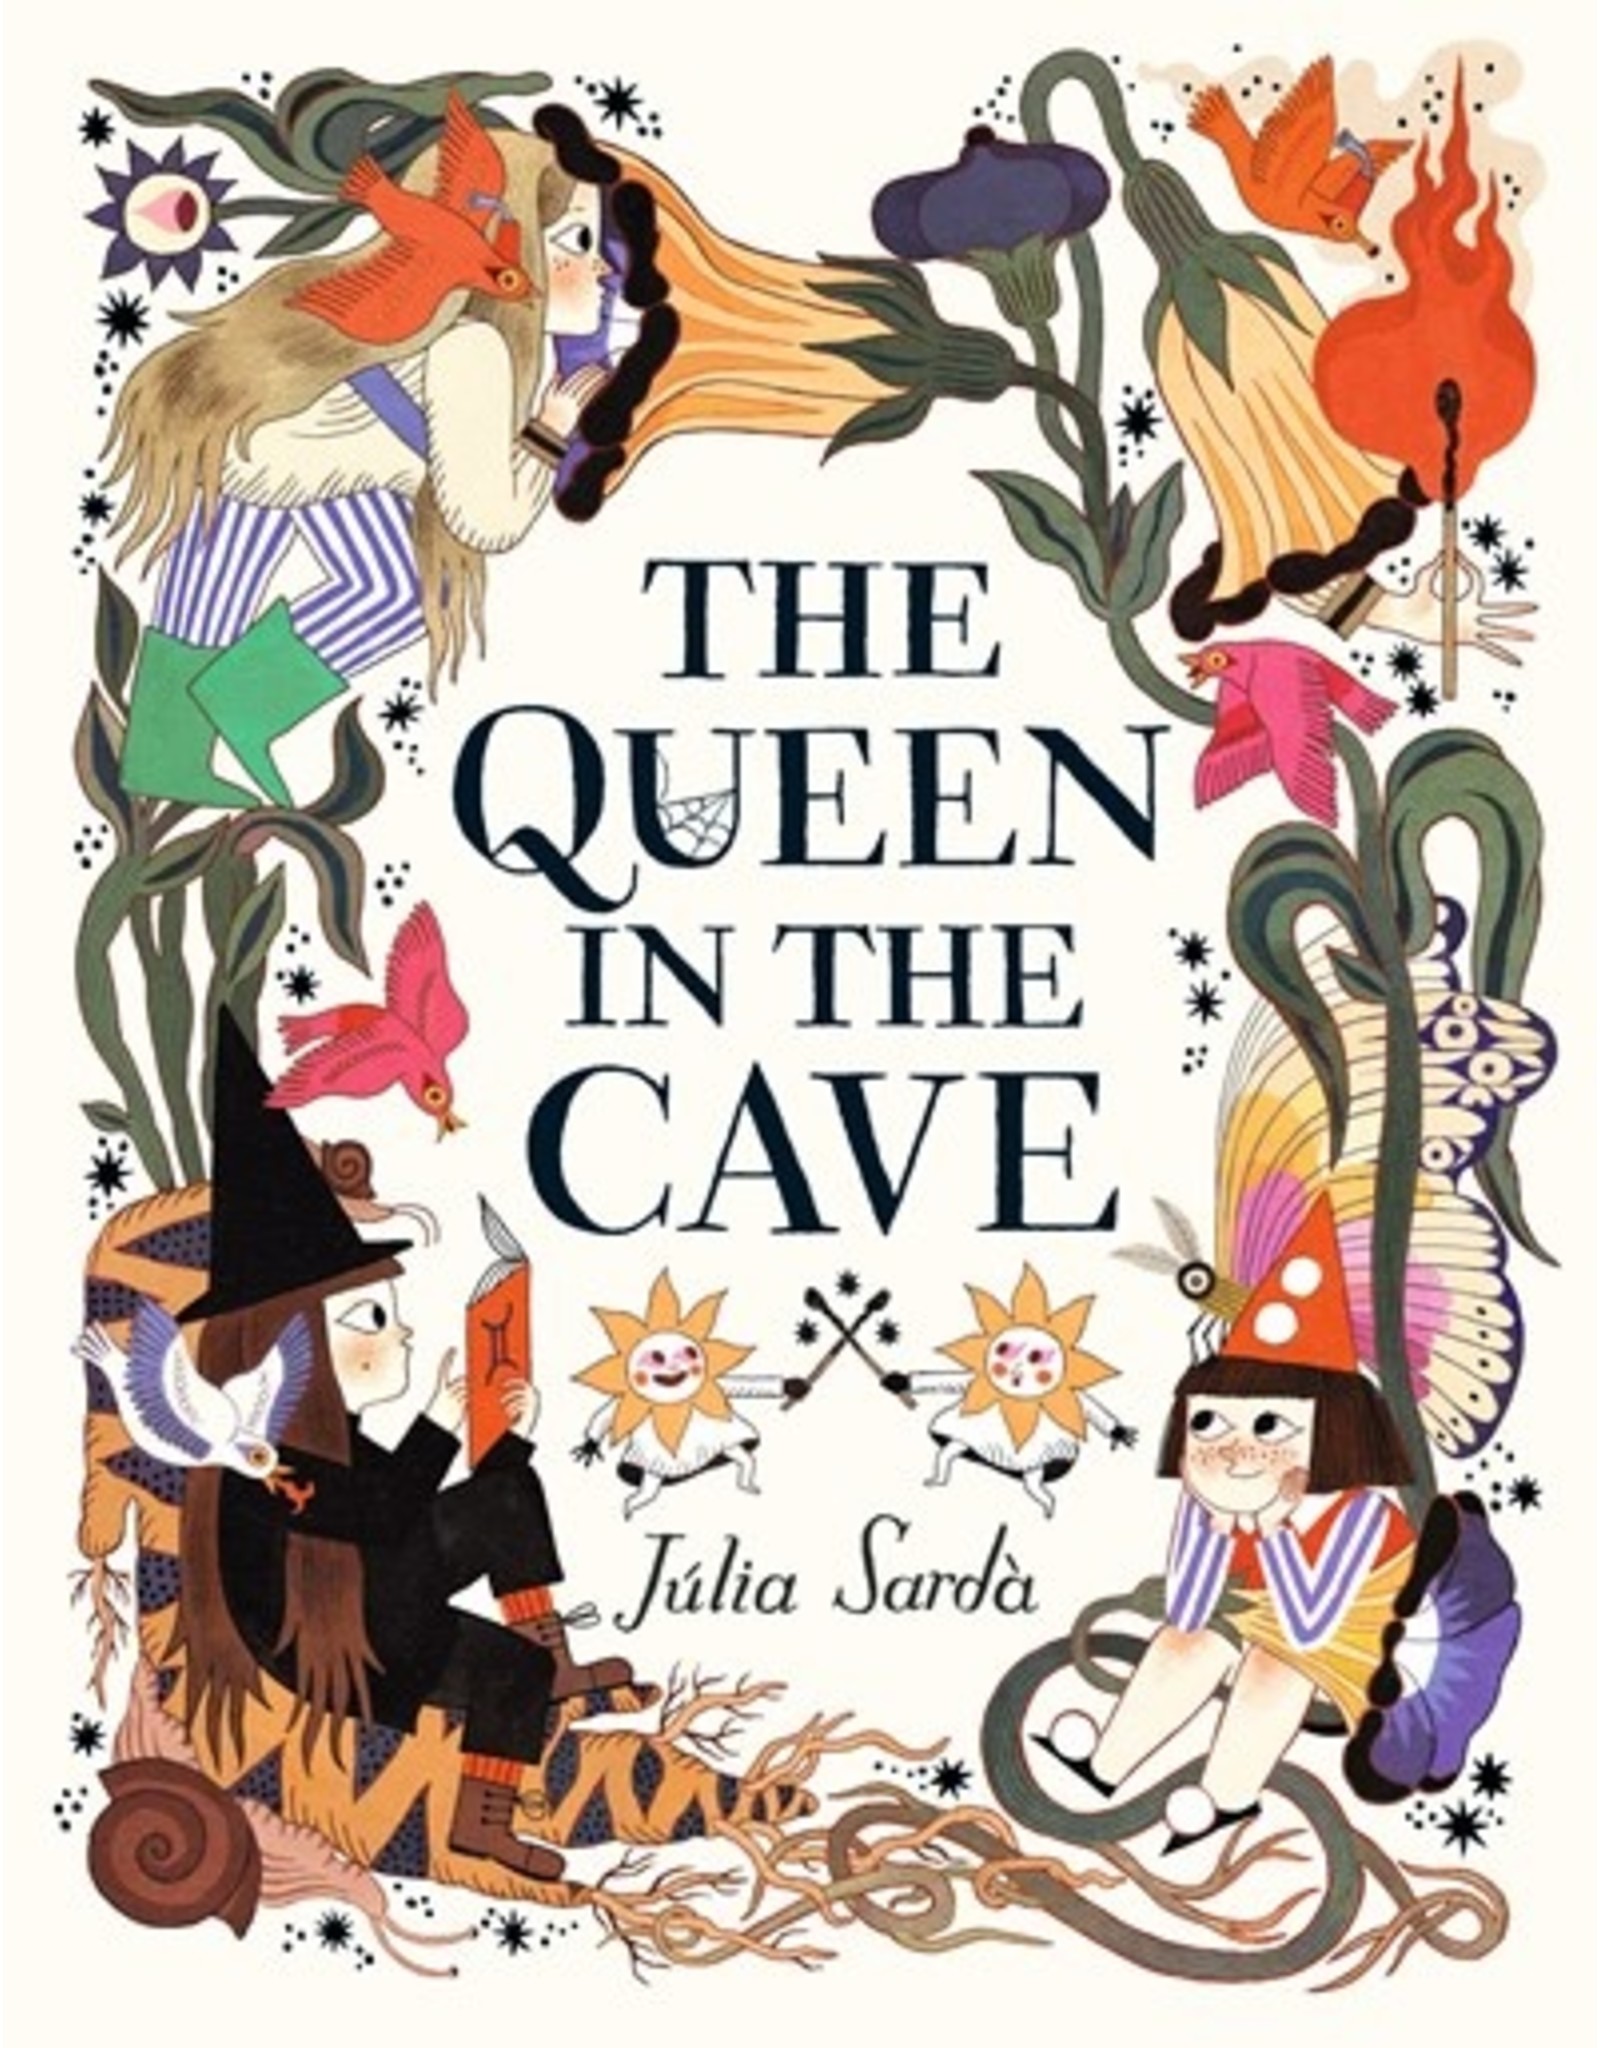 Books The Queen in the Cave by Julia Sarda